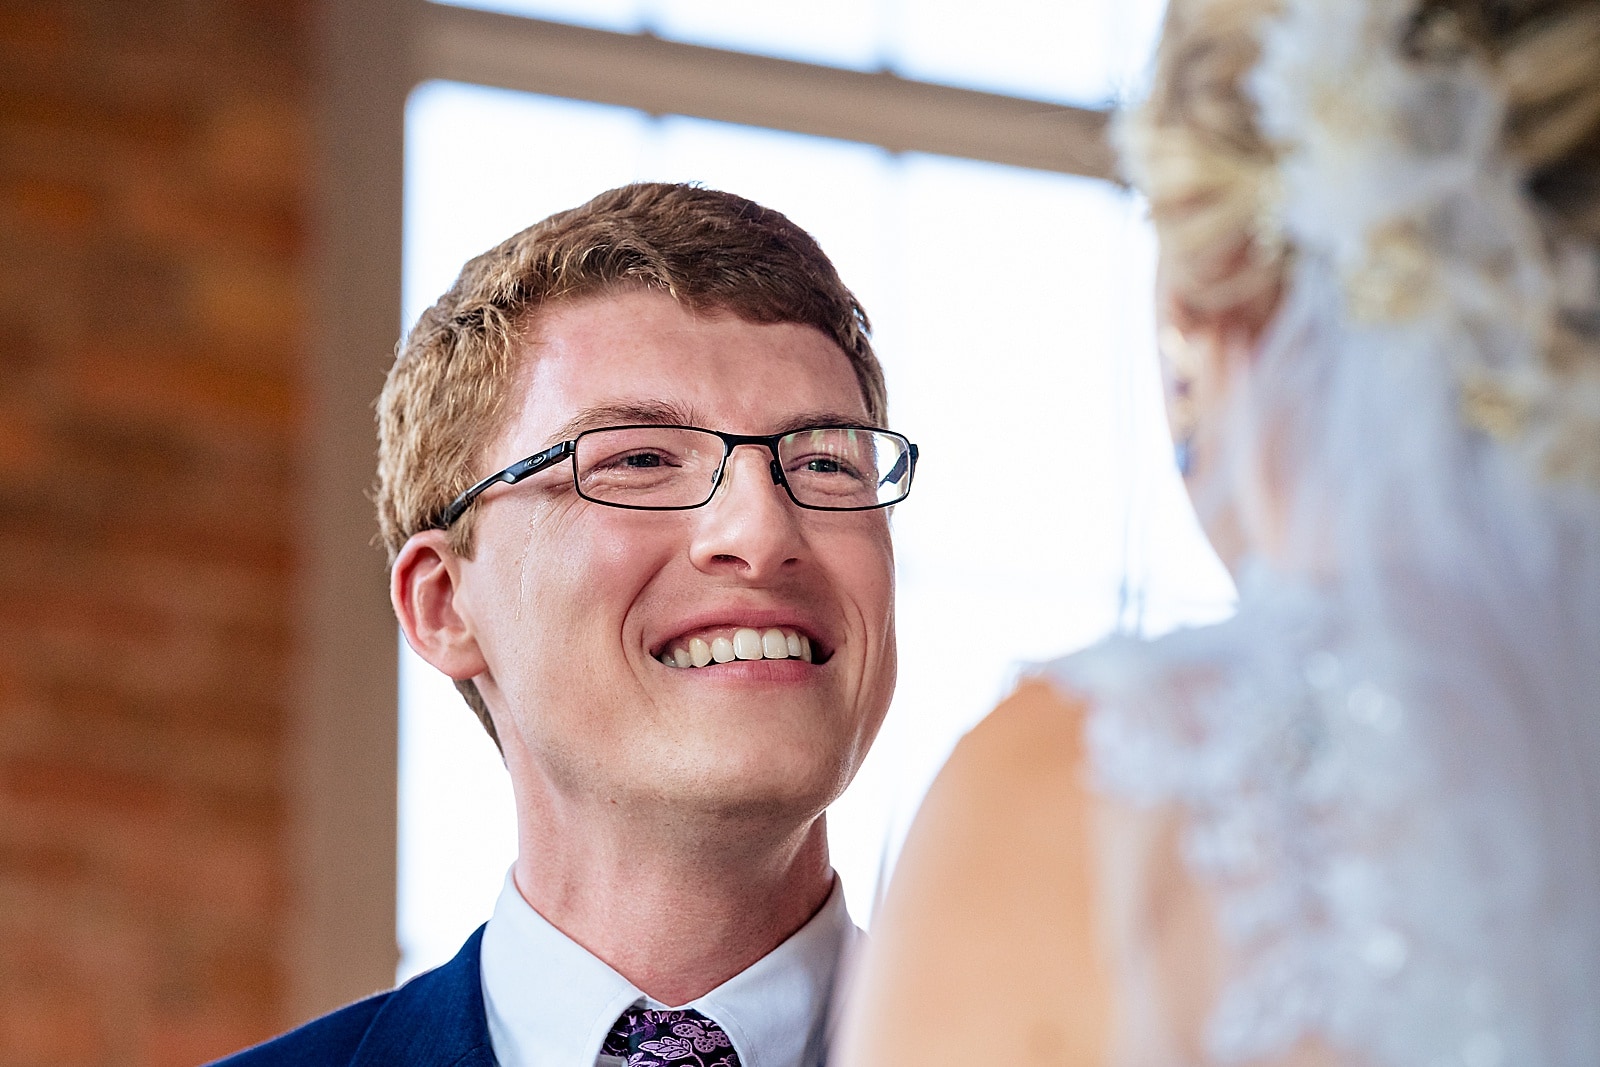 You should be this full of smiles slash tears at your wedding!